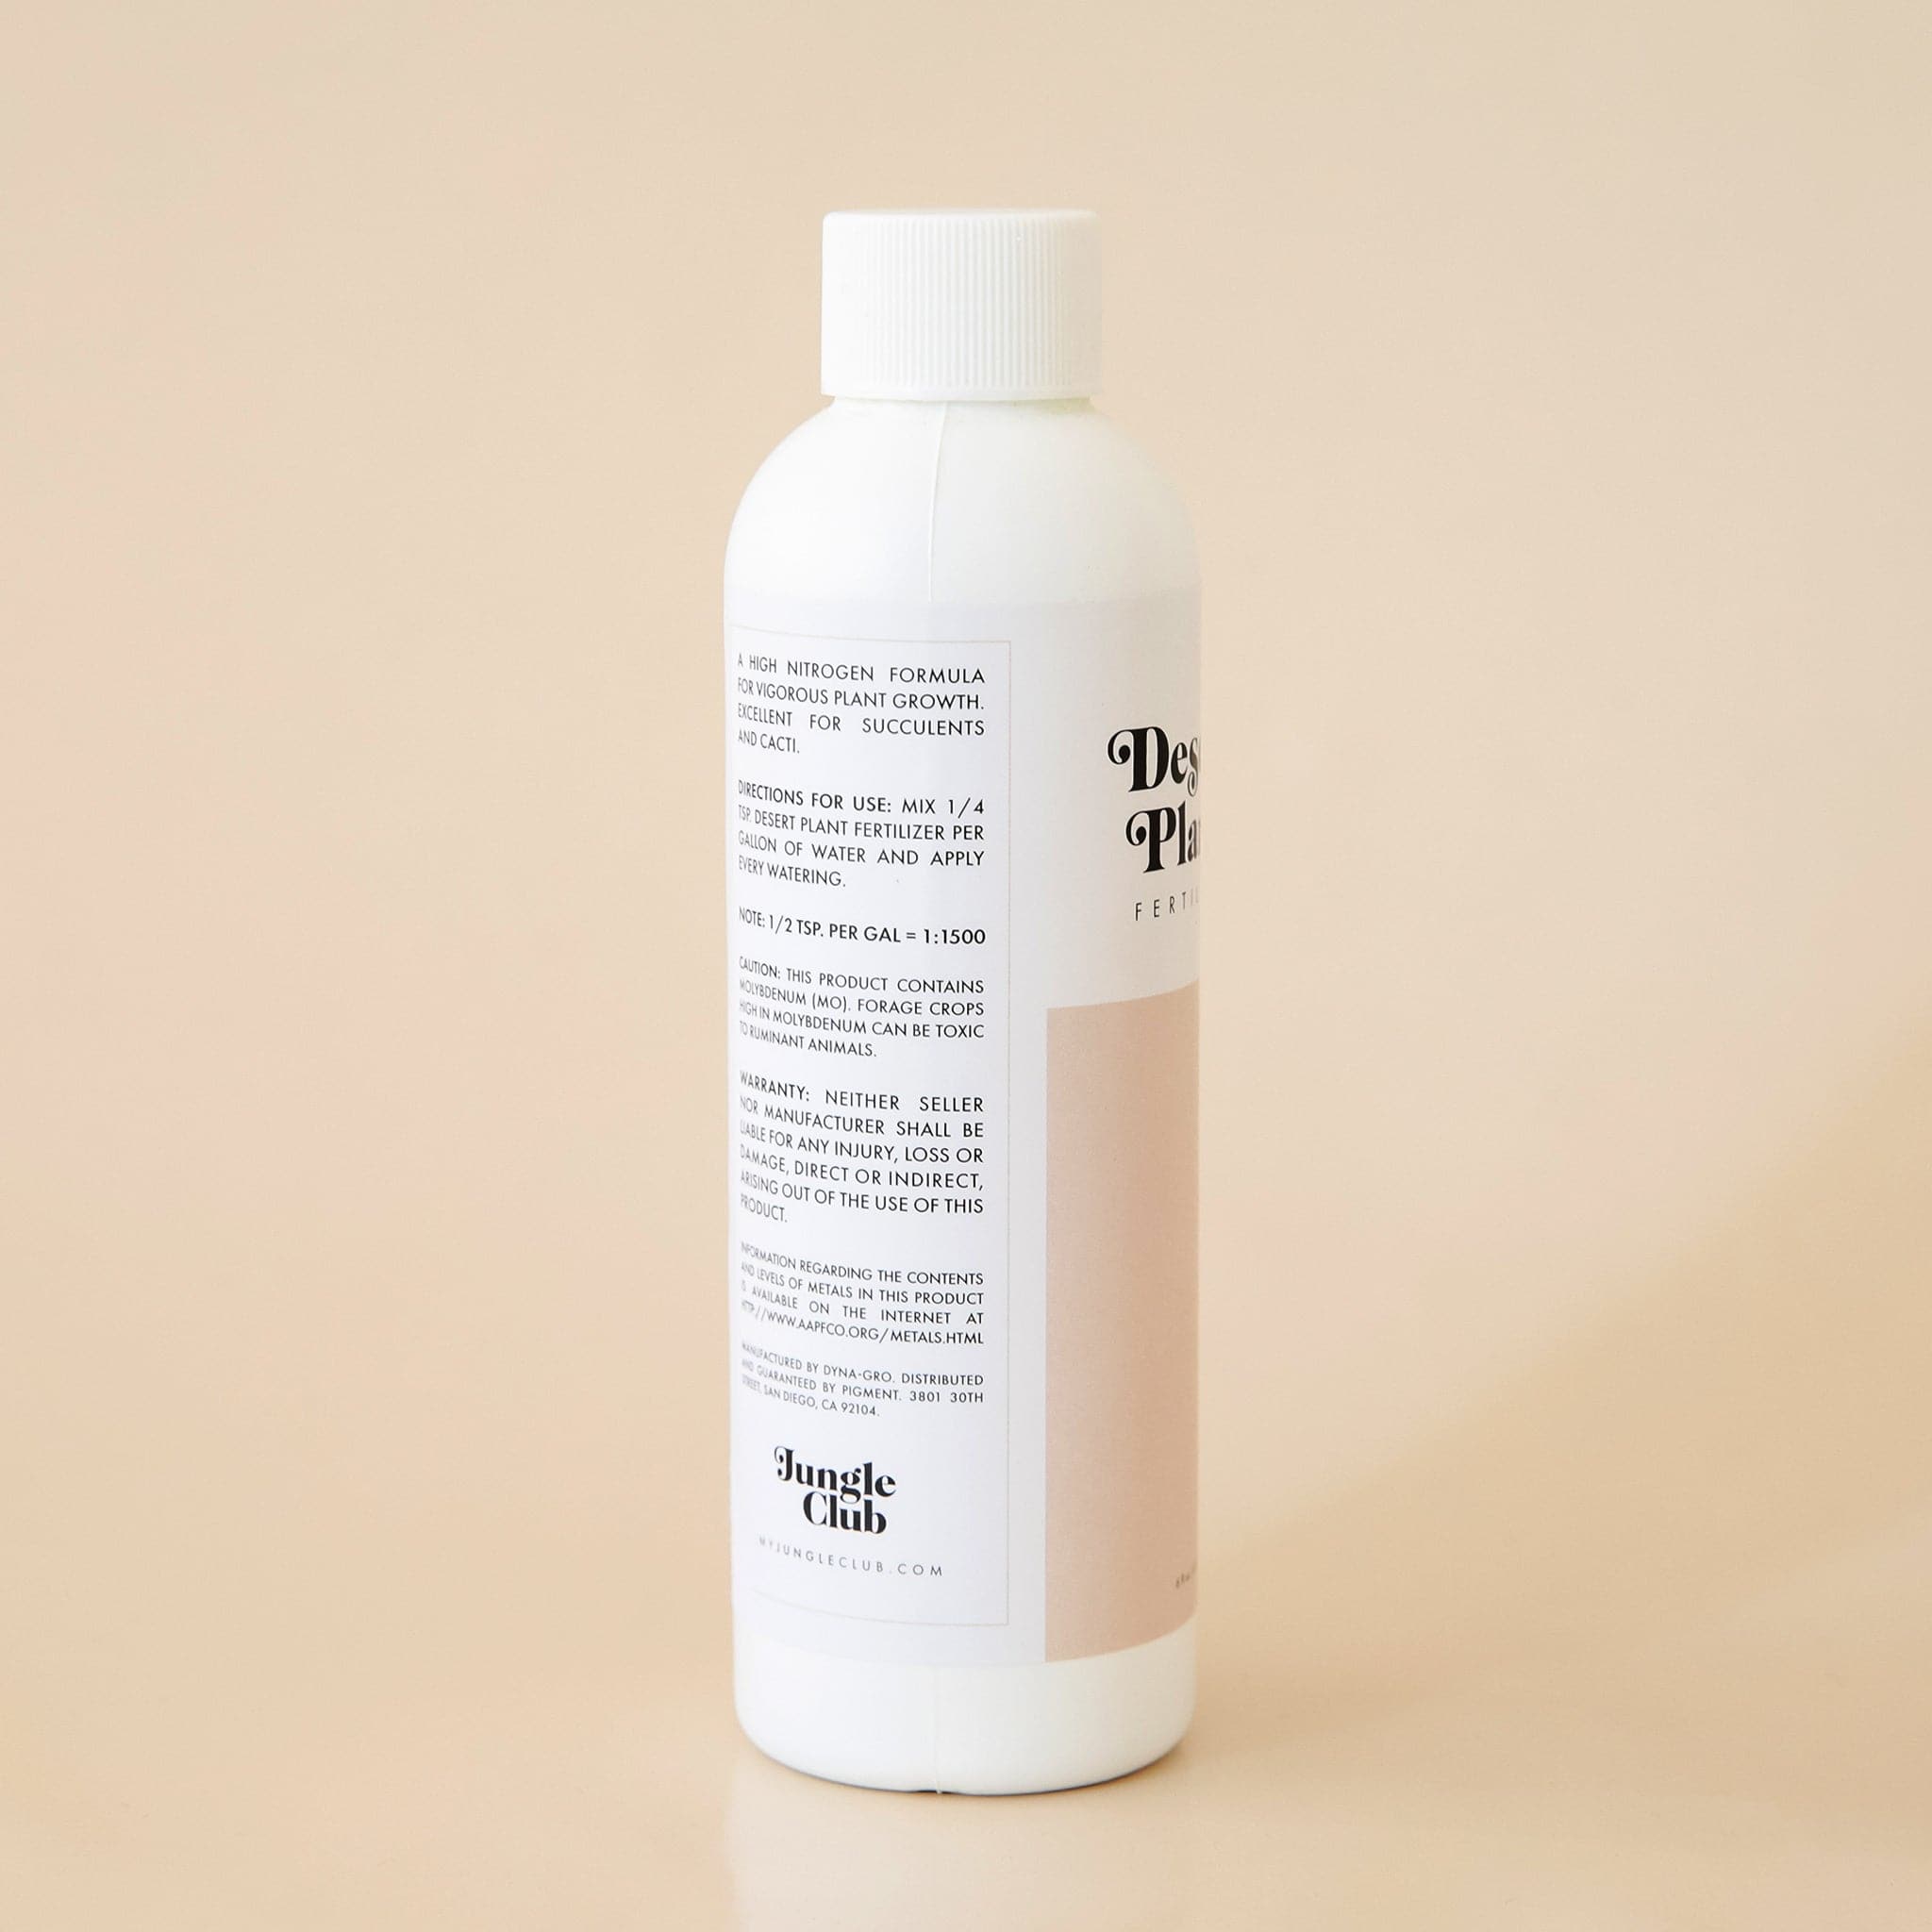 The wrap around label also includes a step-by-step directions sections and manufacture contact information. Similar to the ingredients lists, this section is outlined with a thin, soft beige border.  Below the directions is the company logo reading 'Jungle Club' in black lettering. 